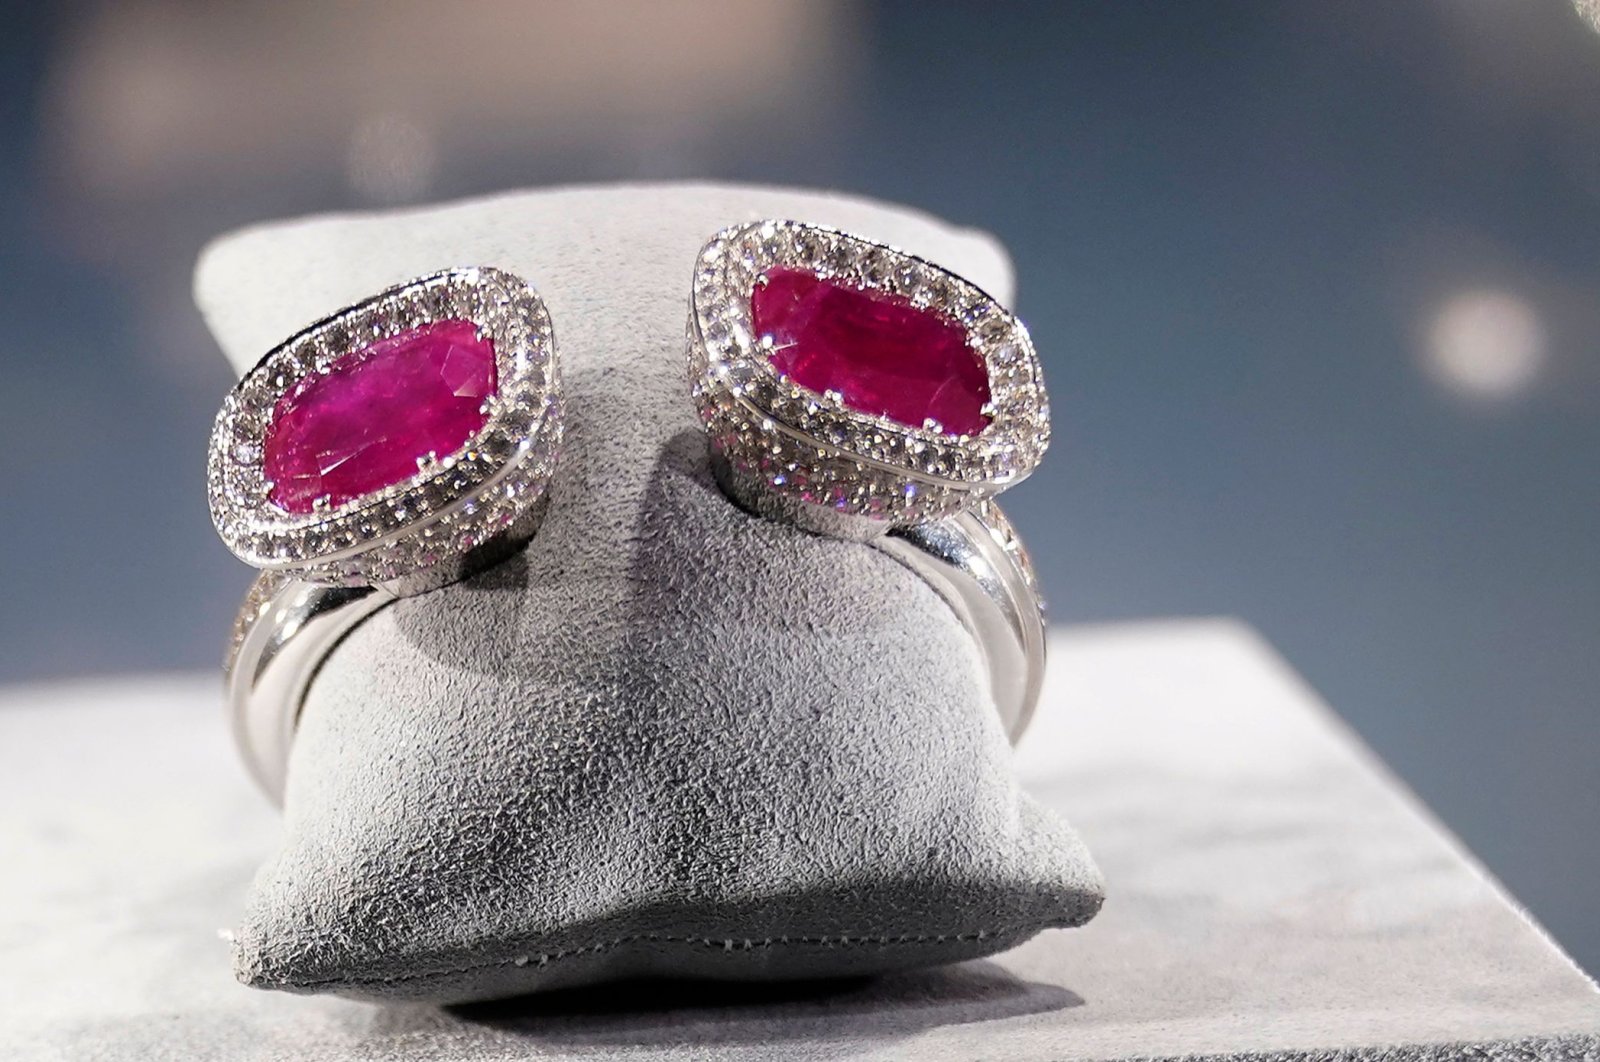 The former Duchess of Windsor's Art Deco ruby and diamond bangle, given by the former Duke of Windsor to his wife on their first wedding anniversary in 1938, is seen during a press preview at Christie's in  New York, U.S., Sep. 28, 2021. (TIMOTHY A. CLARY via AFP)